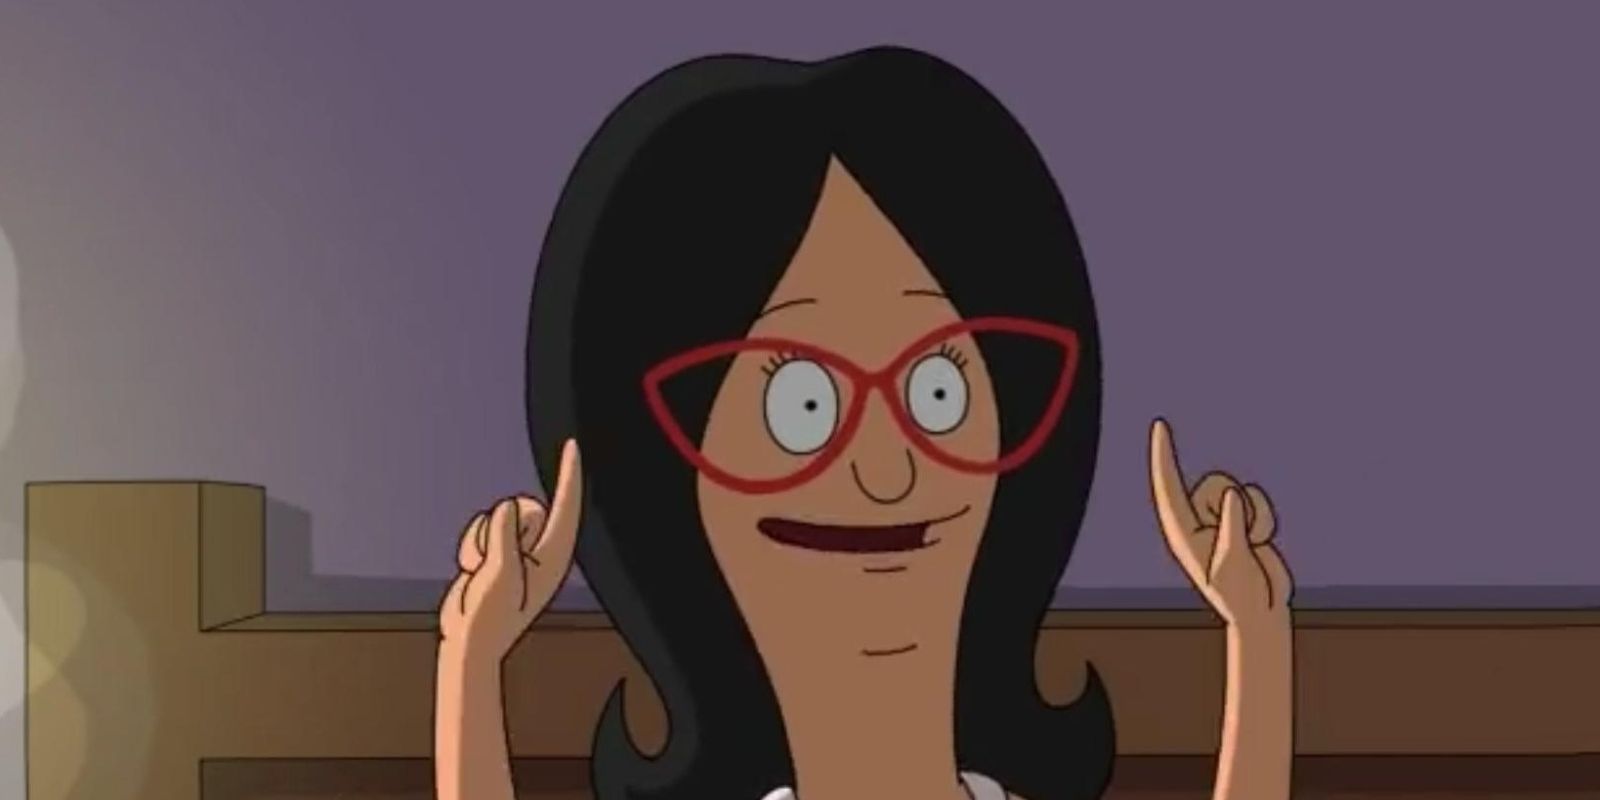 Close up of the character Linda from the Bob's Burgers animated series.